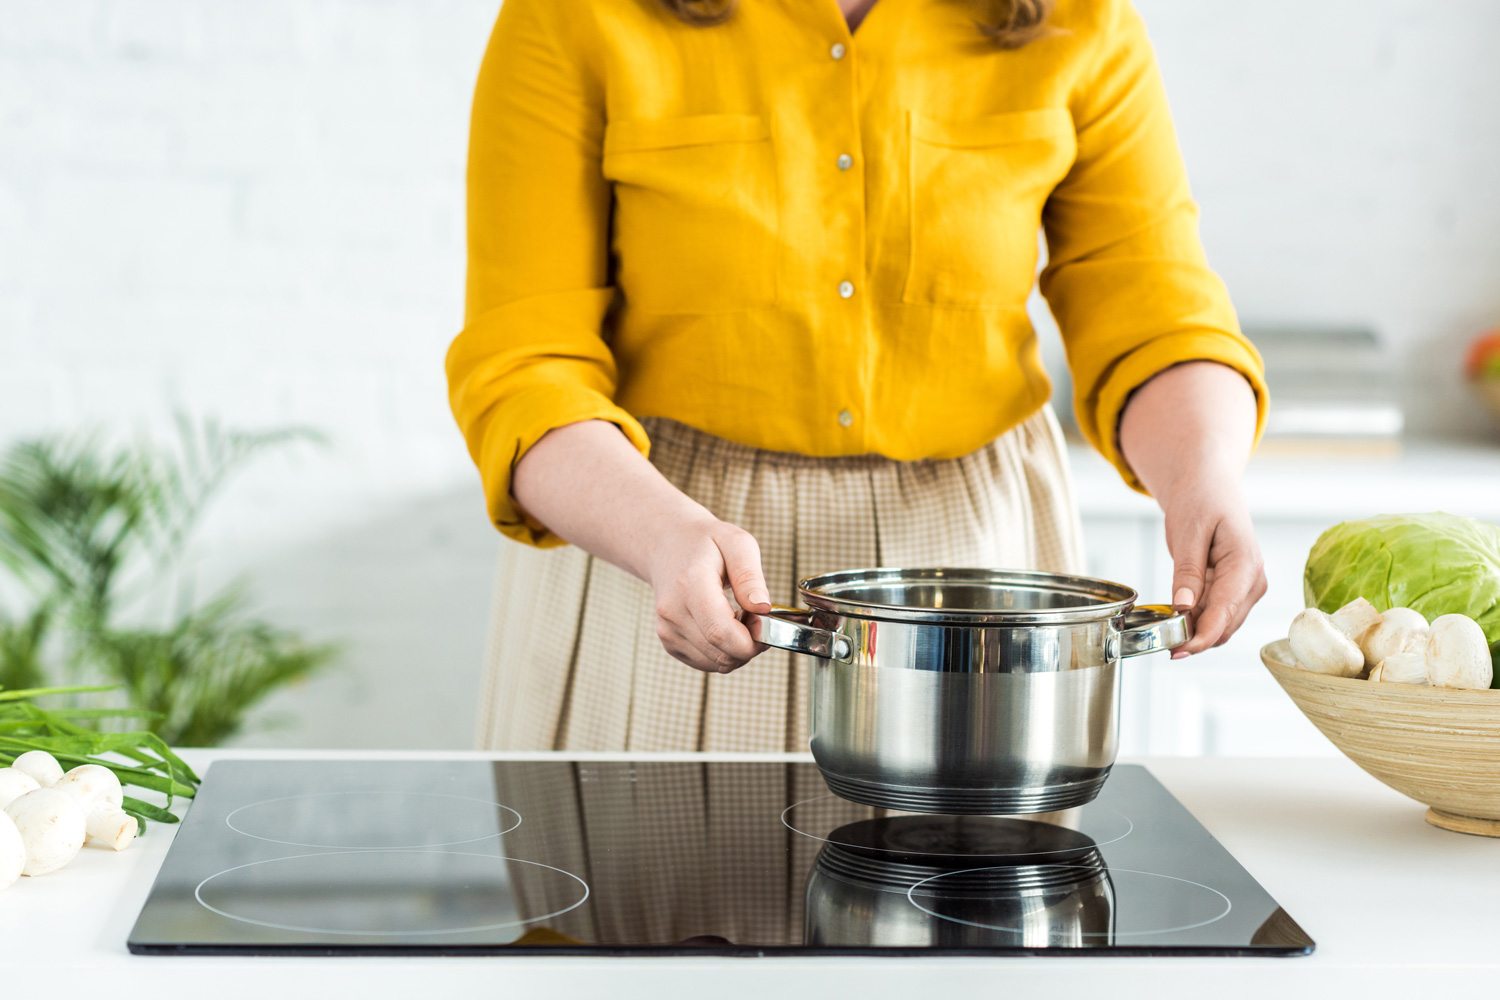 cropped image of woman putting pan on electric stove in kitchen